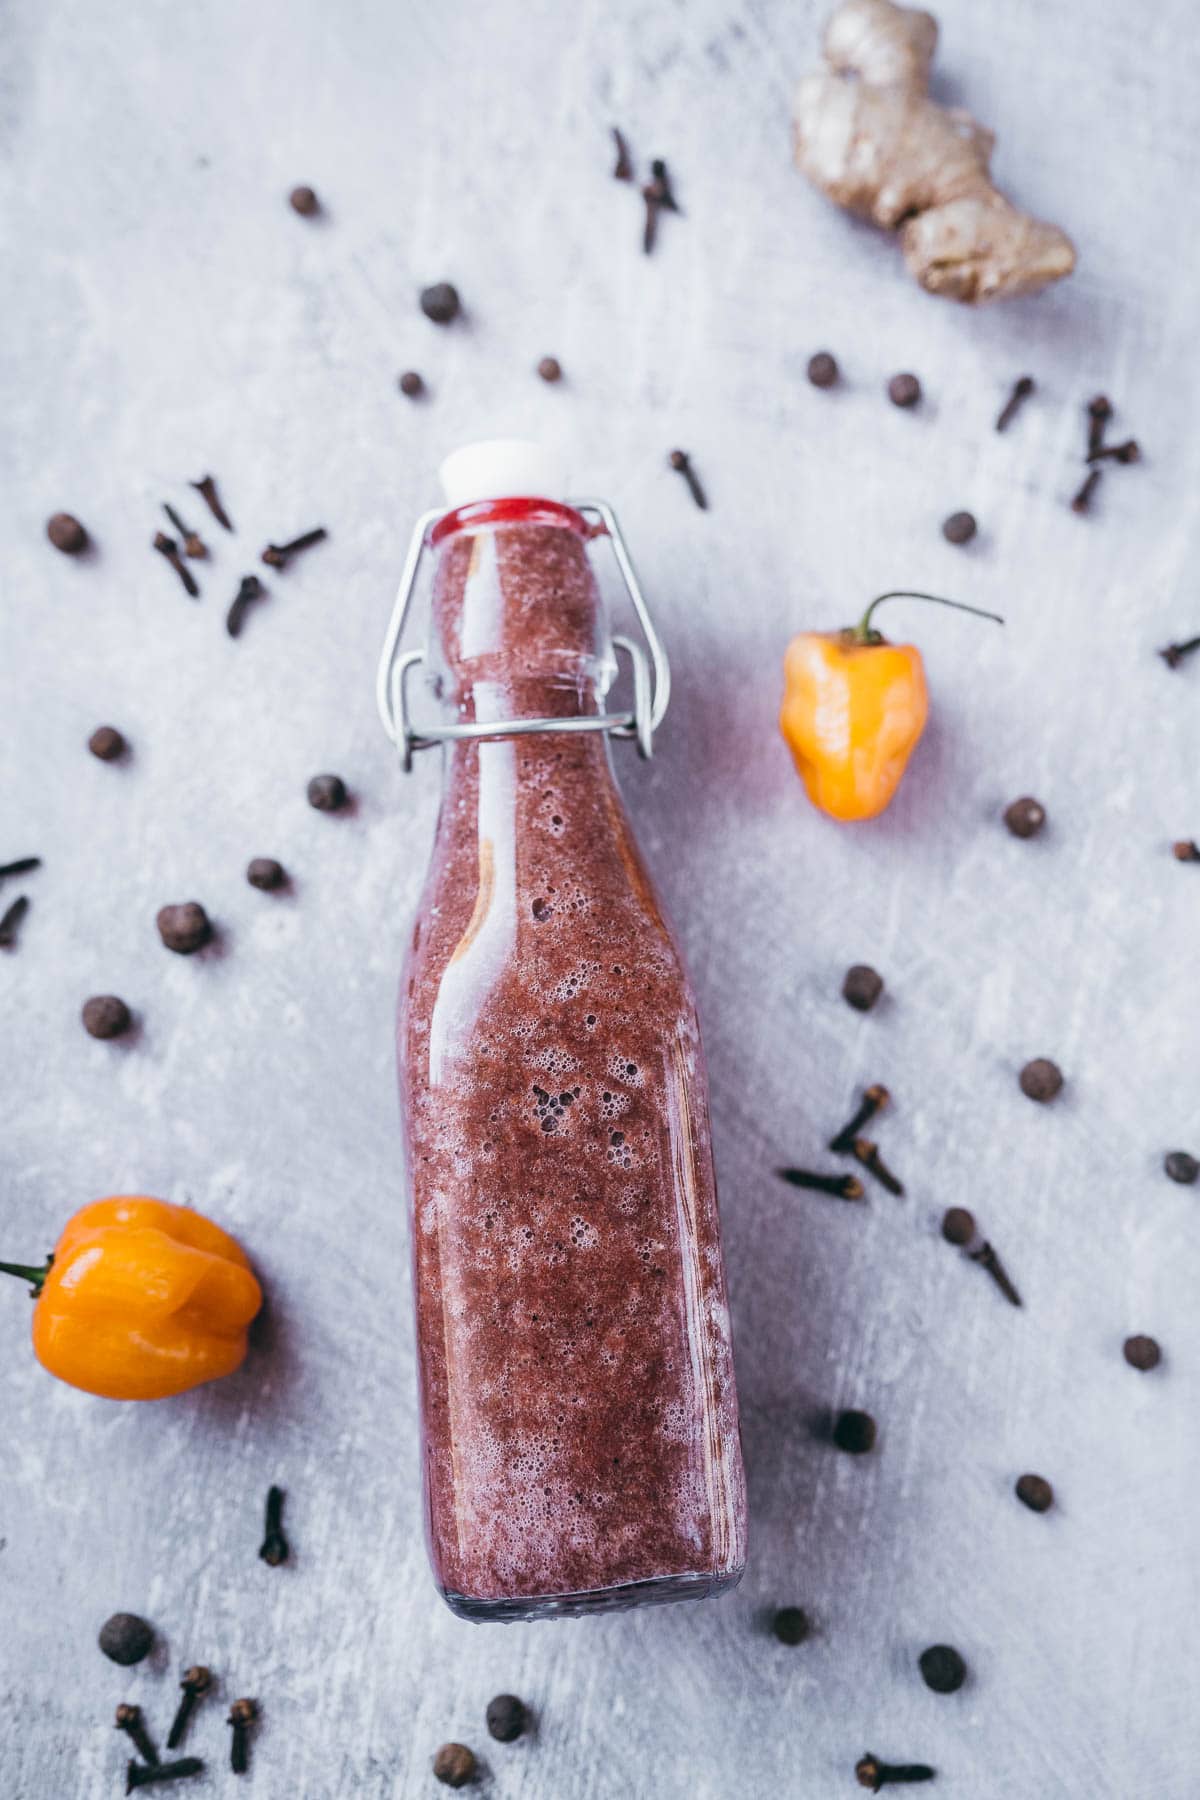 A tall glass bottle filled with a reddish brown sauce resting on a gray table scattered with peppers and spices.